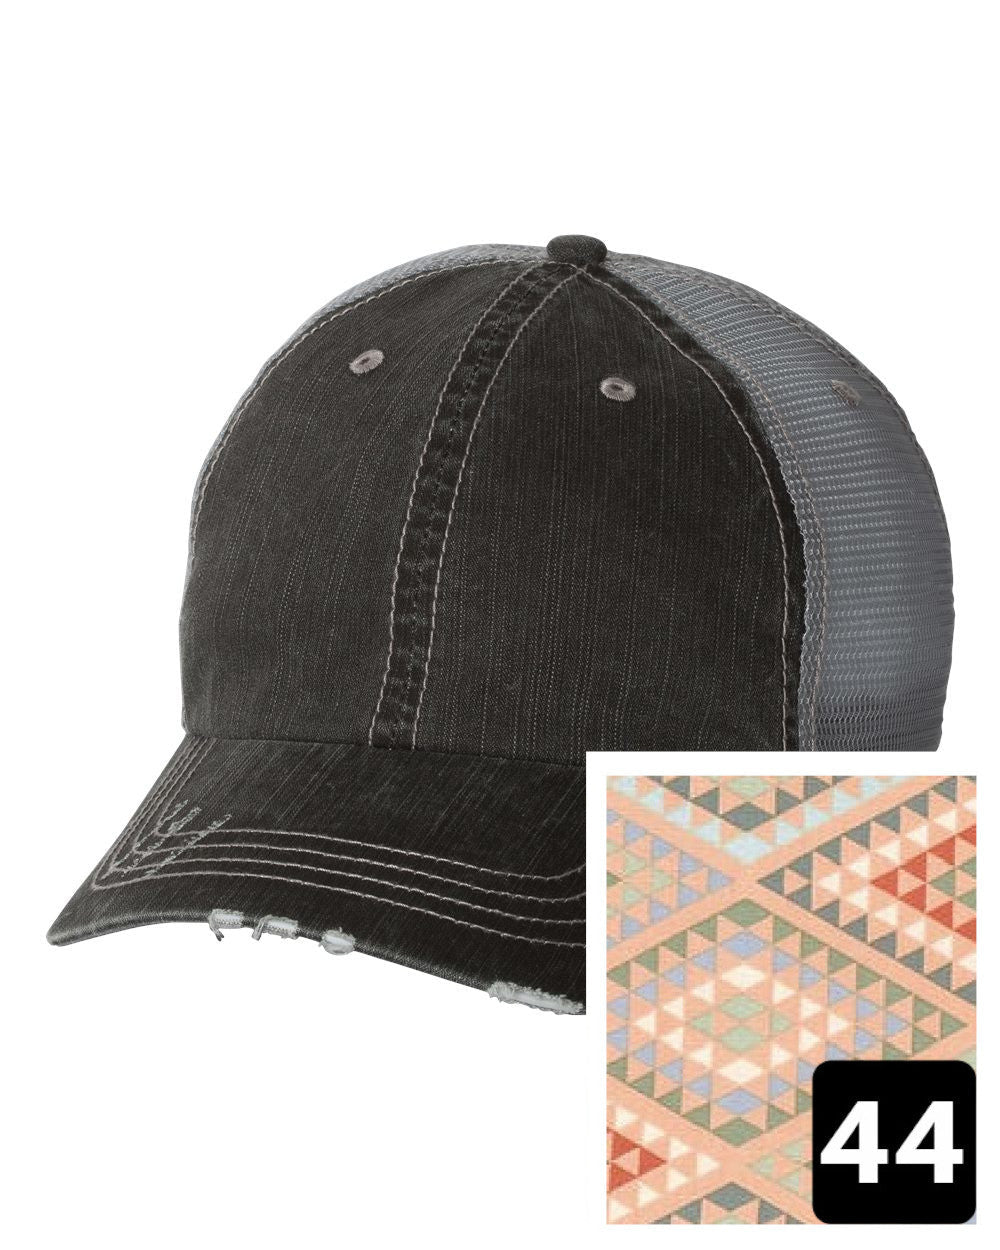 gray distressed trucker hat with navy coral and white chevron fabric state of Rhode Island